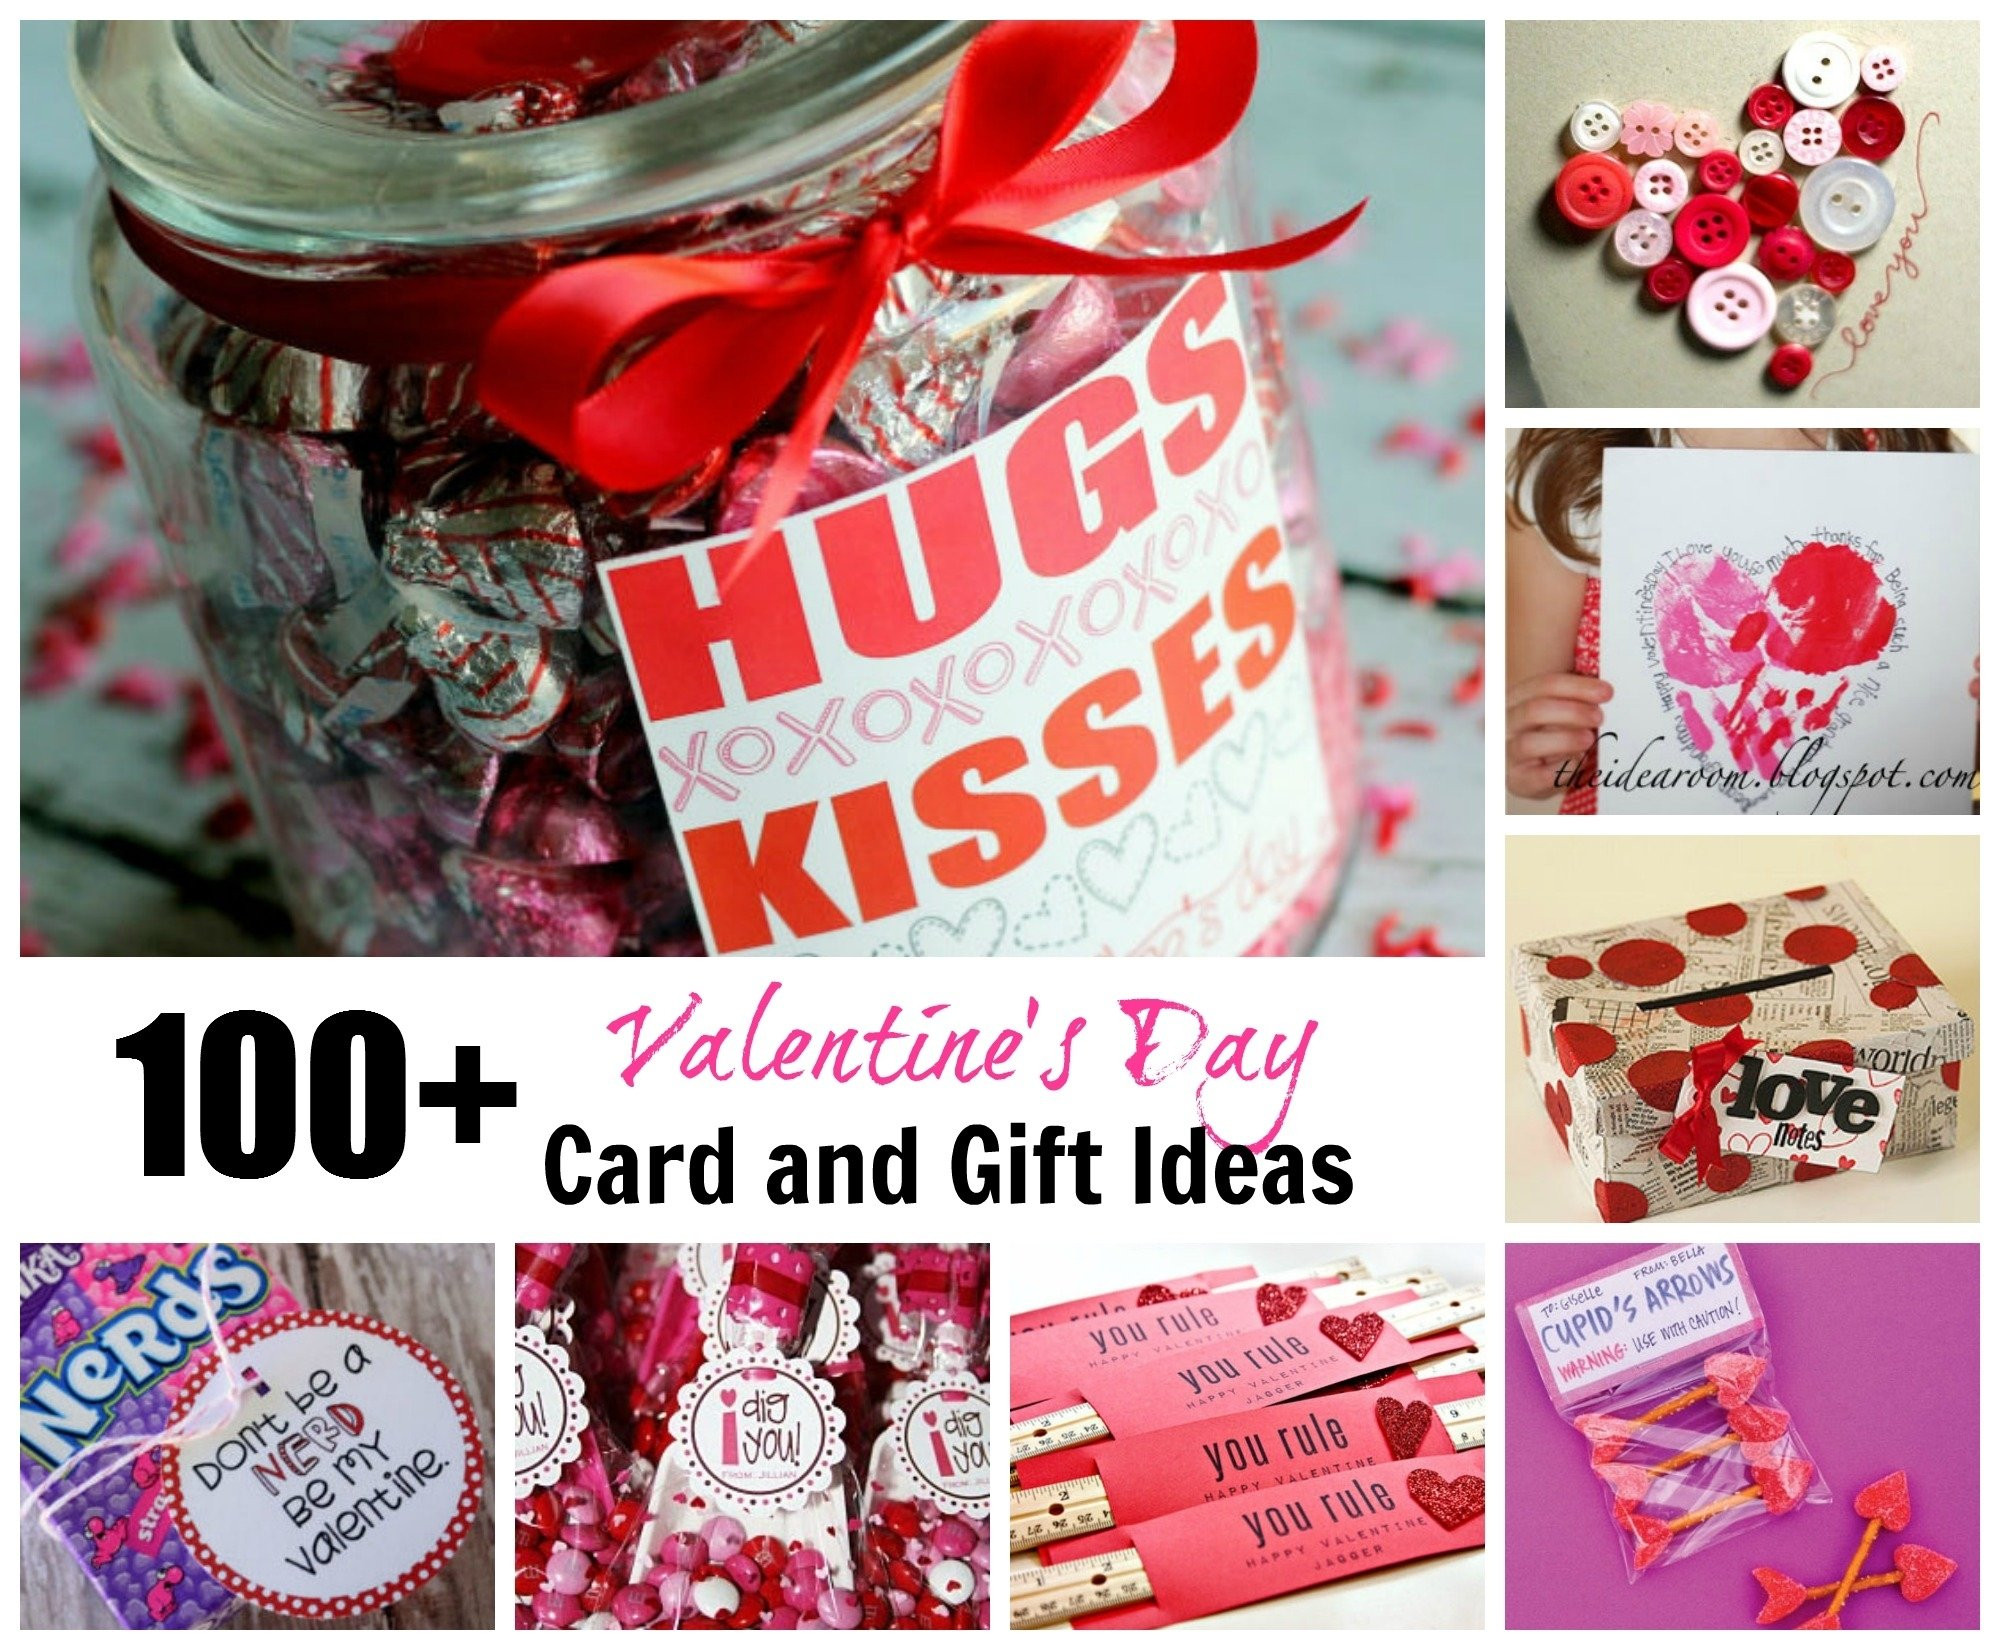 Valentines Day Handmade Gift Ideas
 10 Lovable Homemade Valentines Ideas For Him 2020